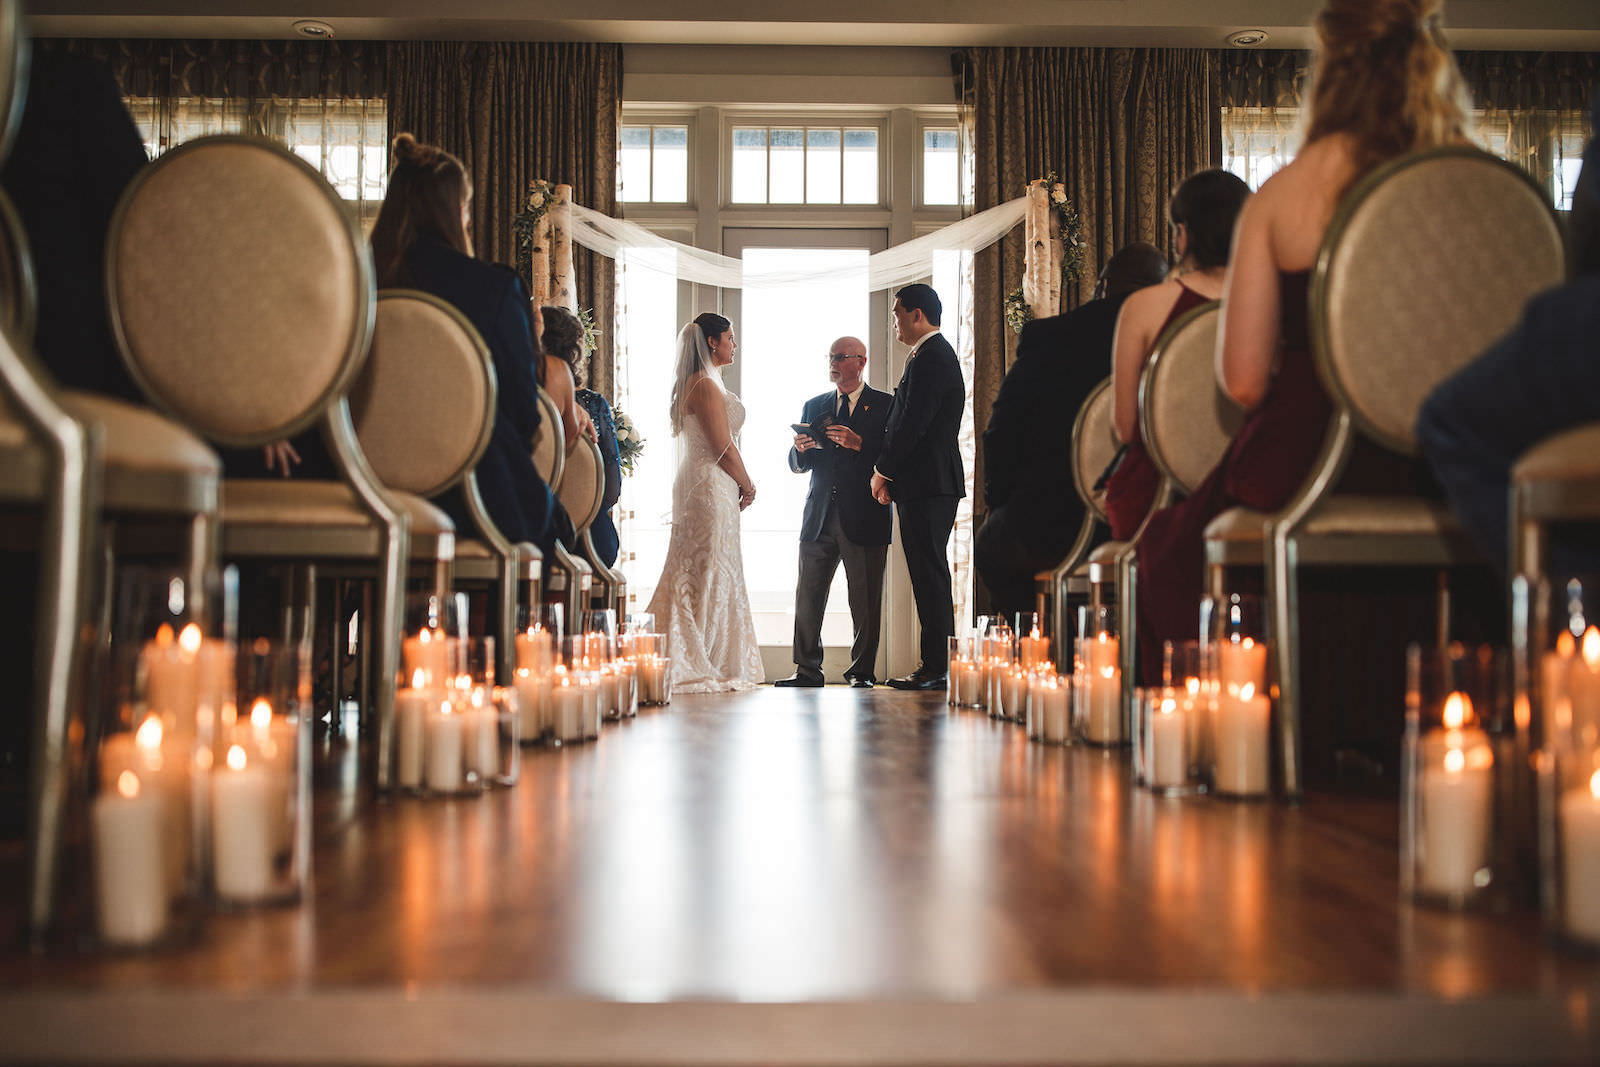 Tampa Bride and Groom Exchanging Vows During Wedding Ceremony | St. Pete Wedding Venue The Birchwood